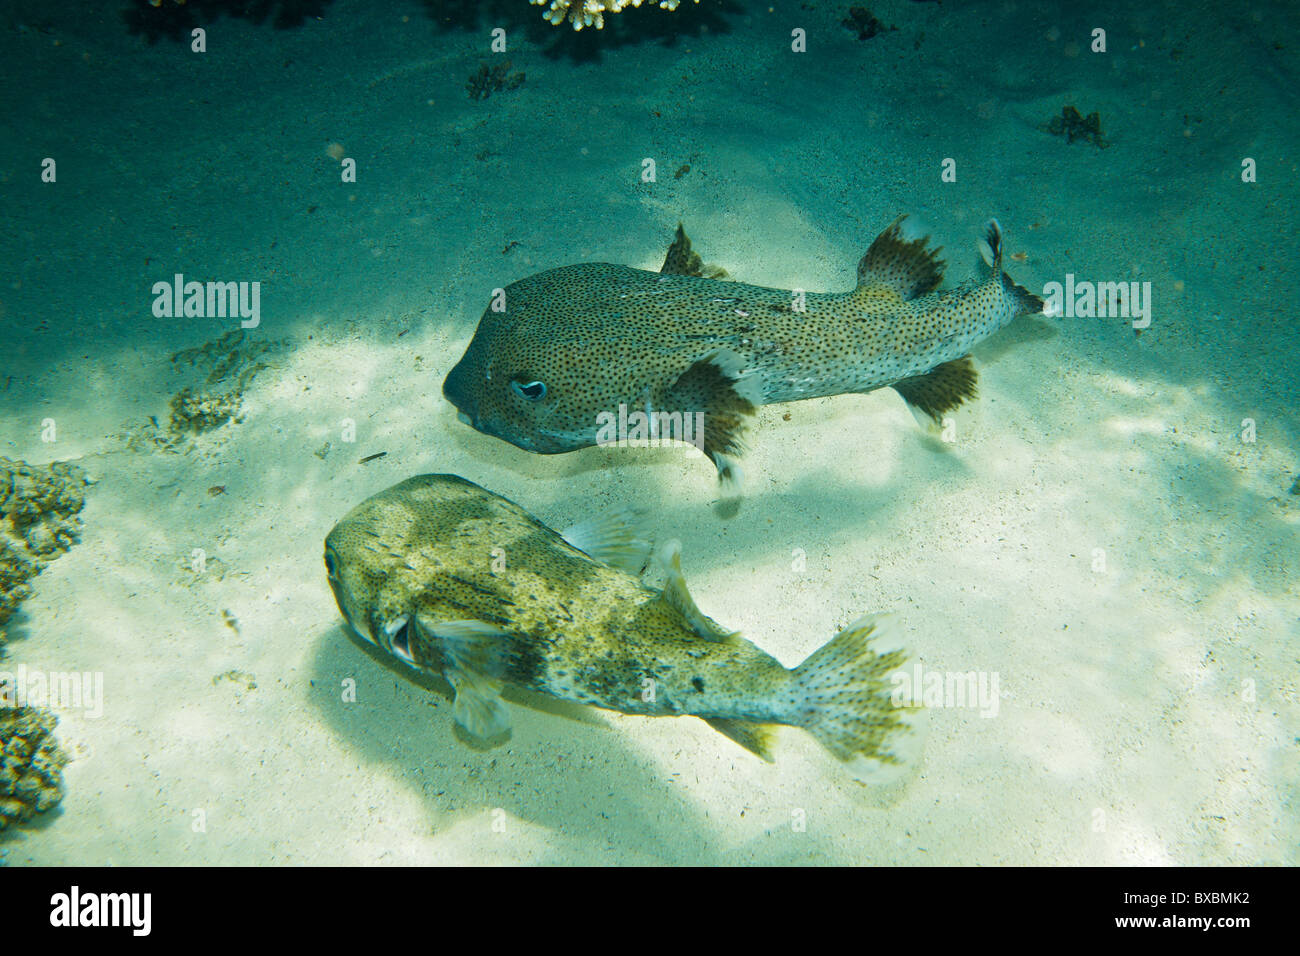 Diodon hystrix - Diodontidae - Pair of fishes in Red Sea Stock Photo